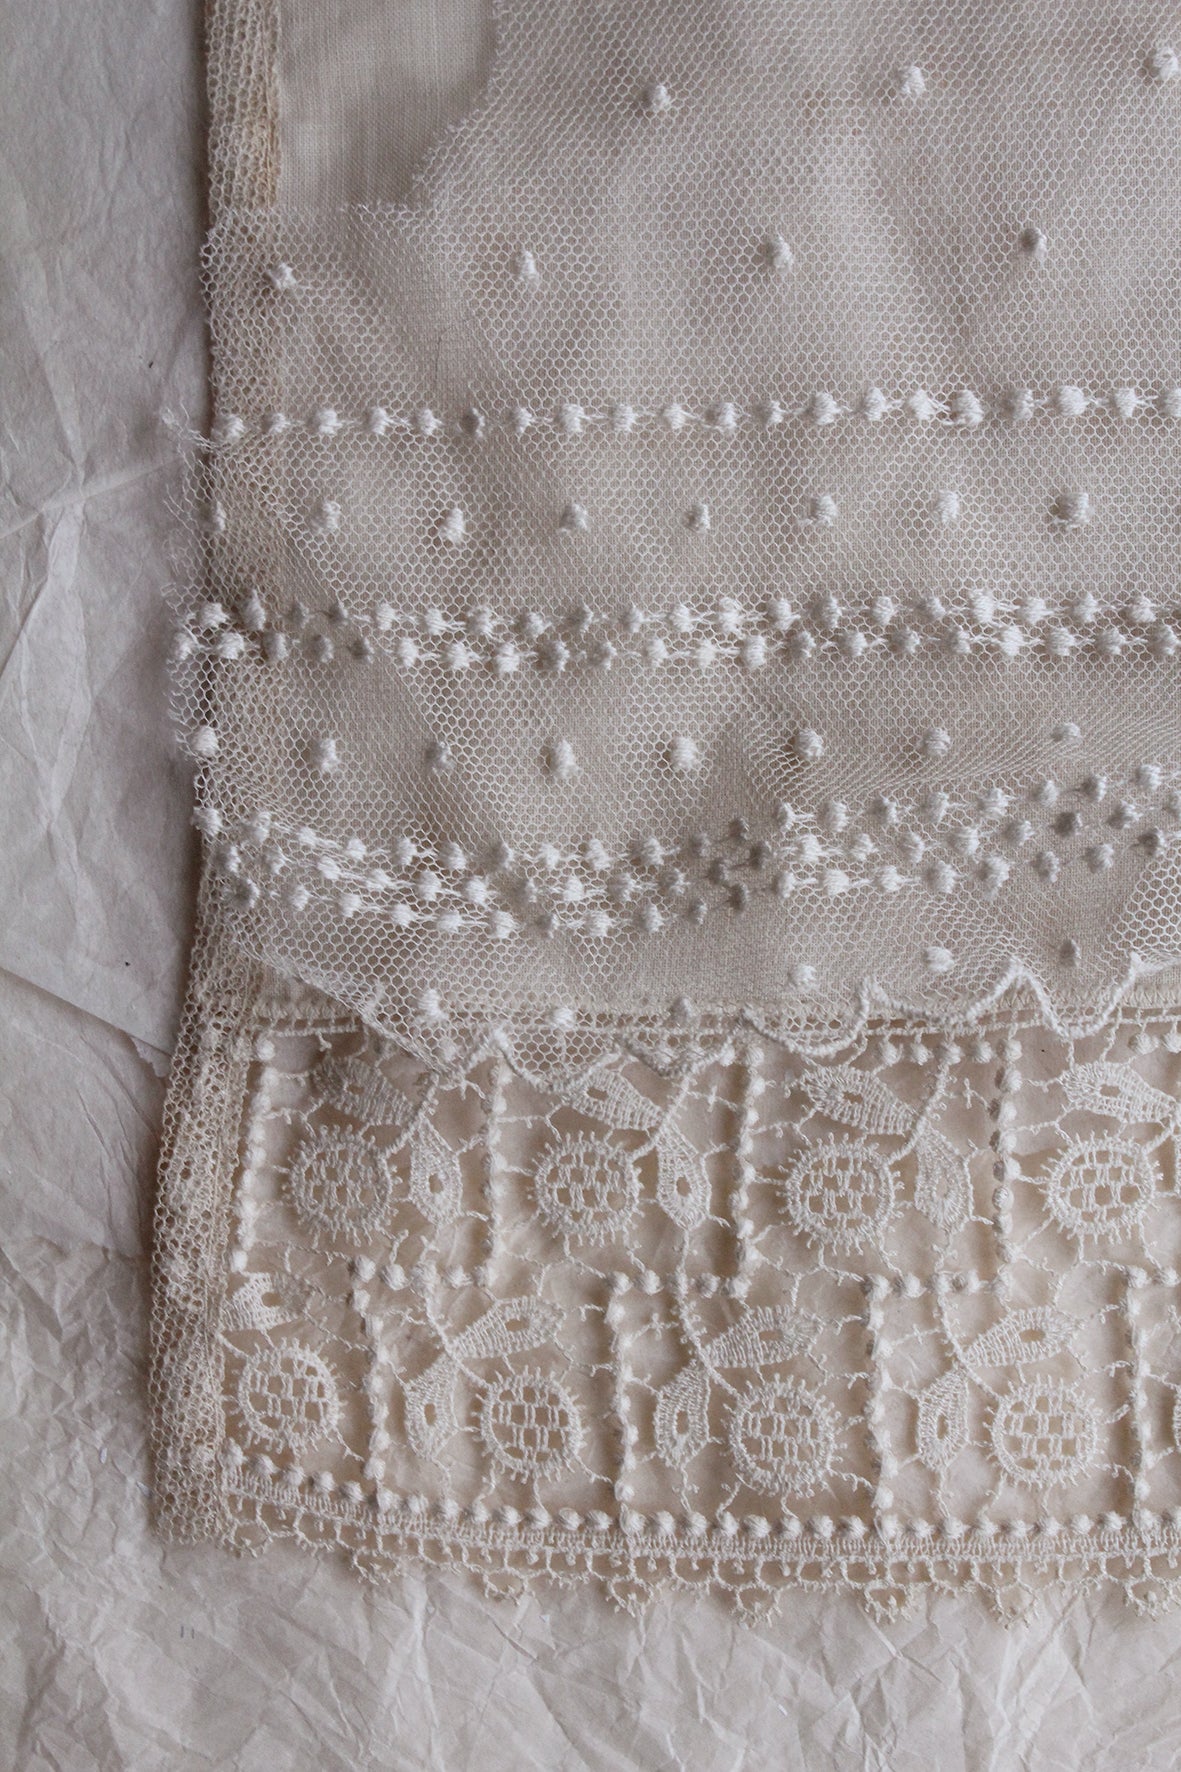 Collection of Antique Lace Samples - B4